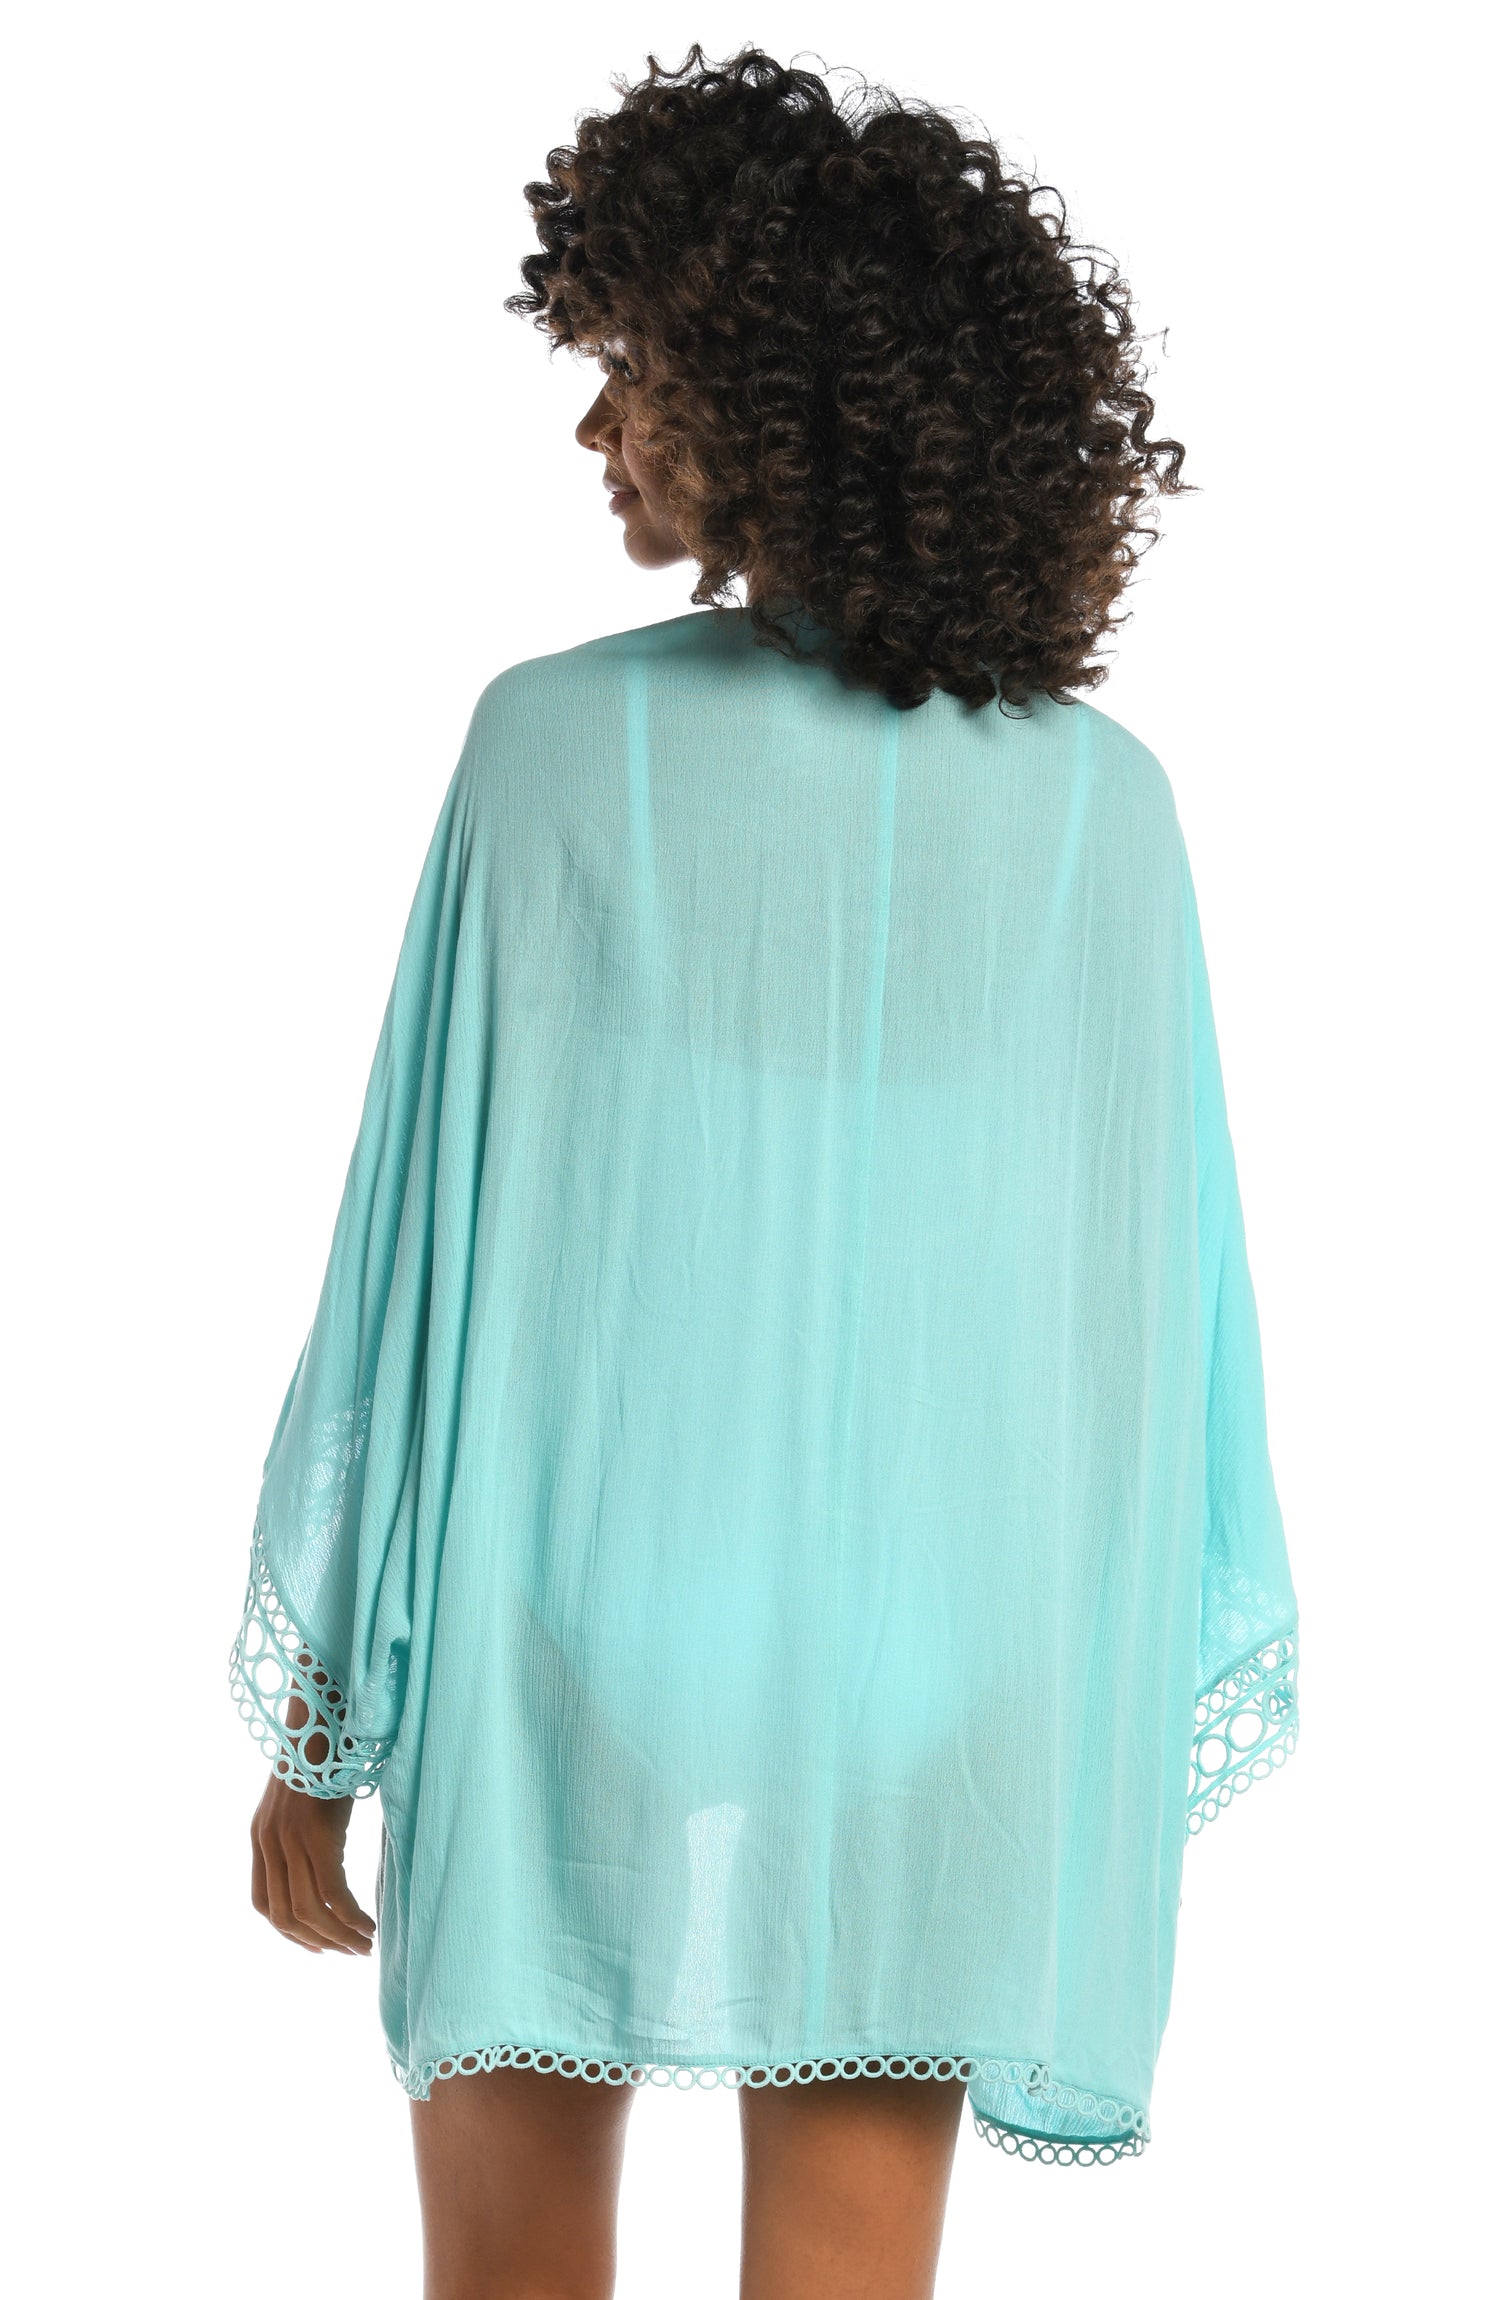 Model is wearing a ice blue colored crochet kimono cover up from our Illusion Covers collection!